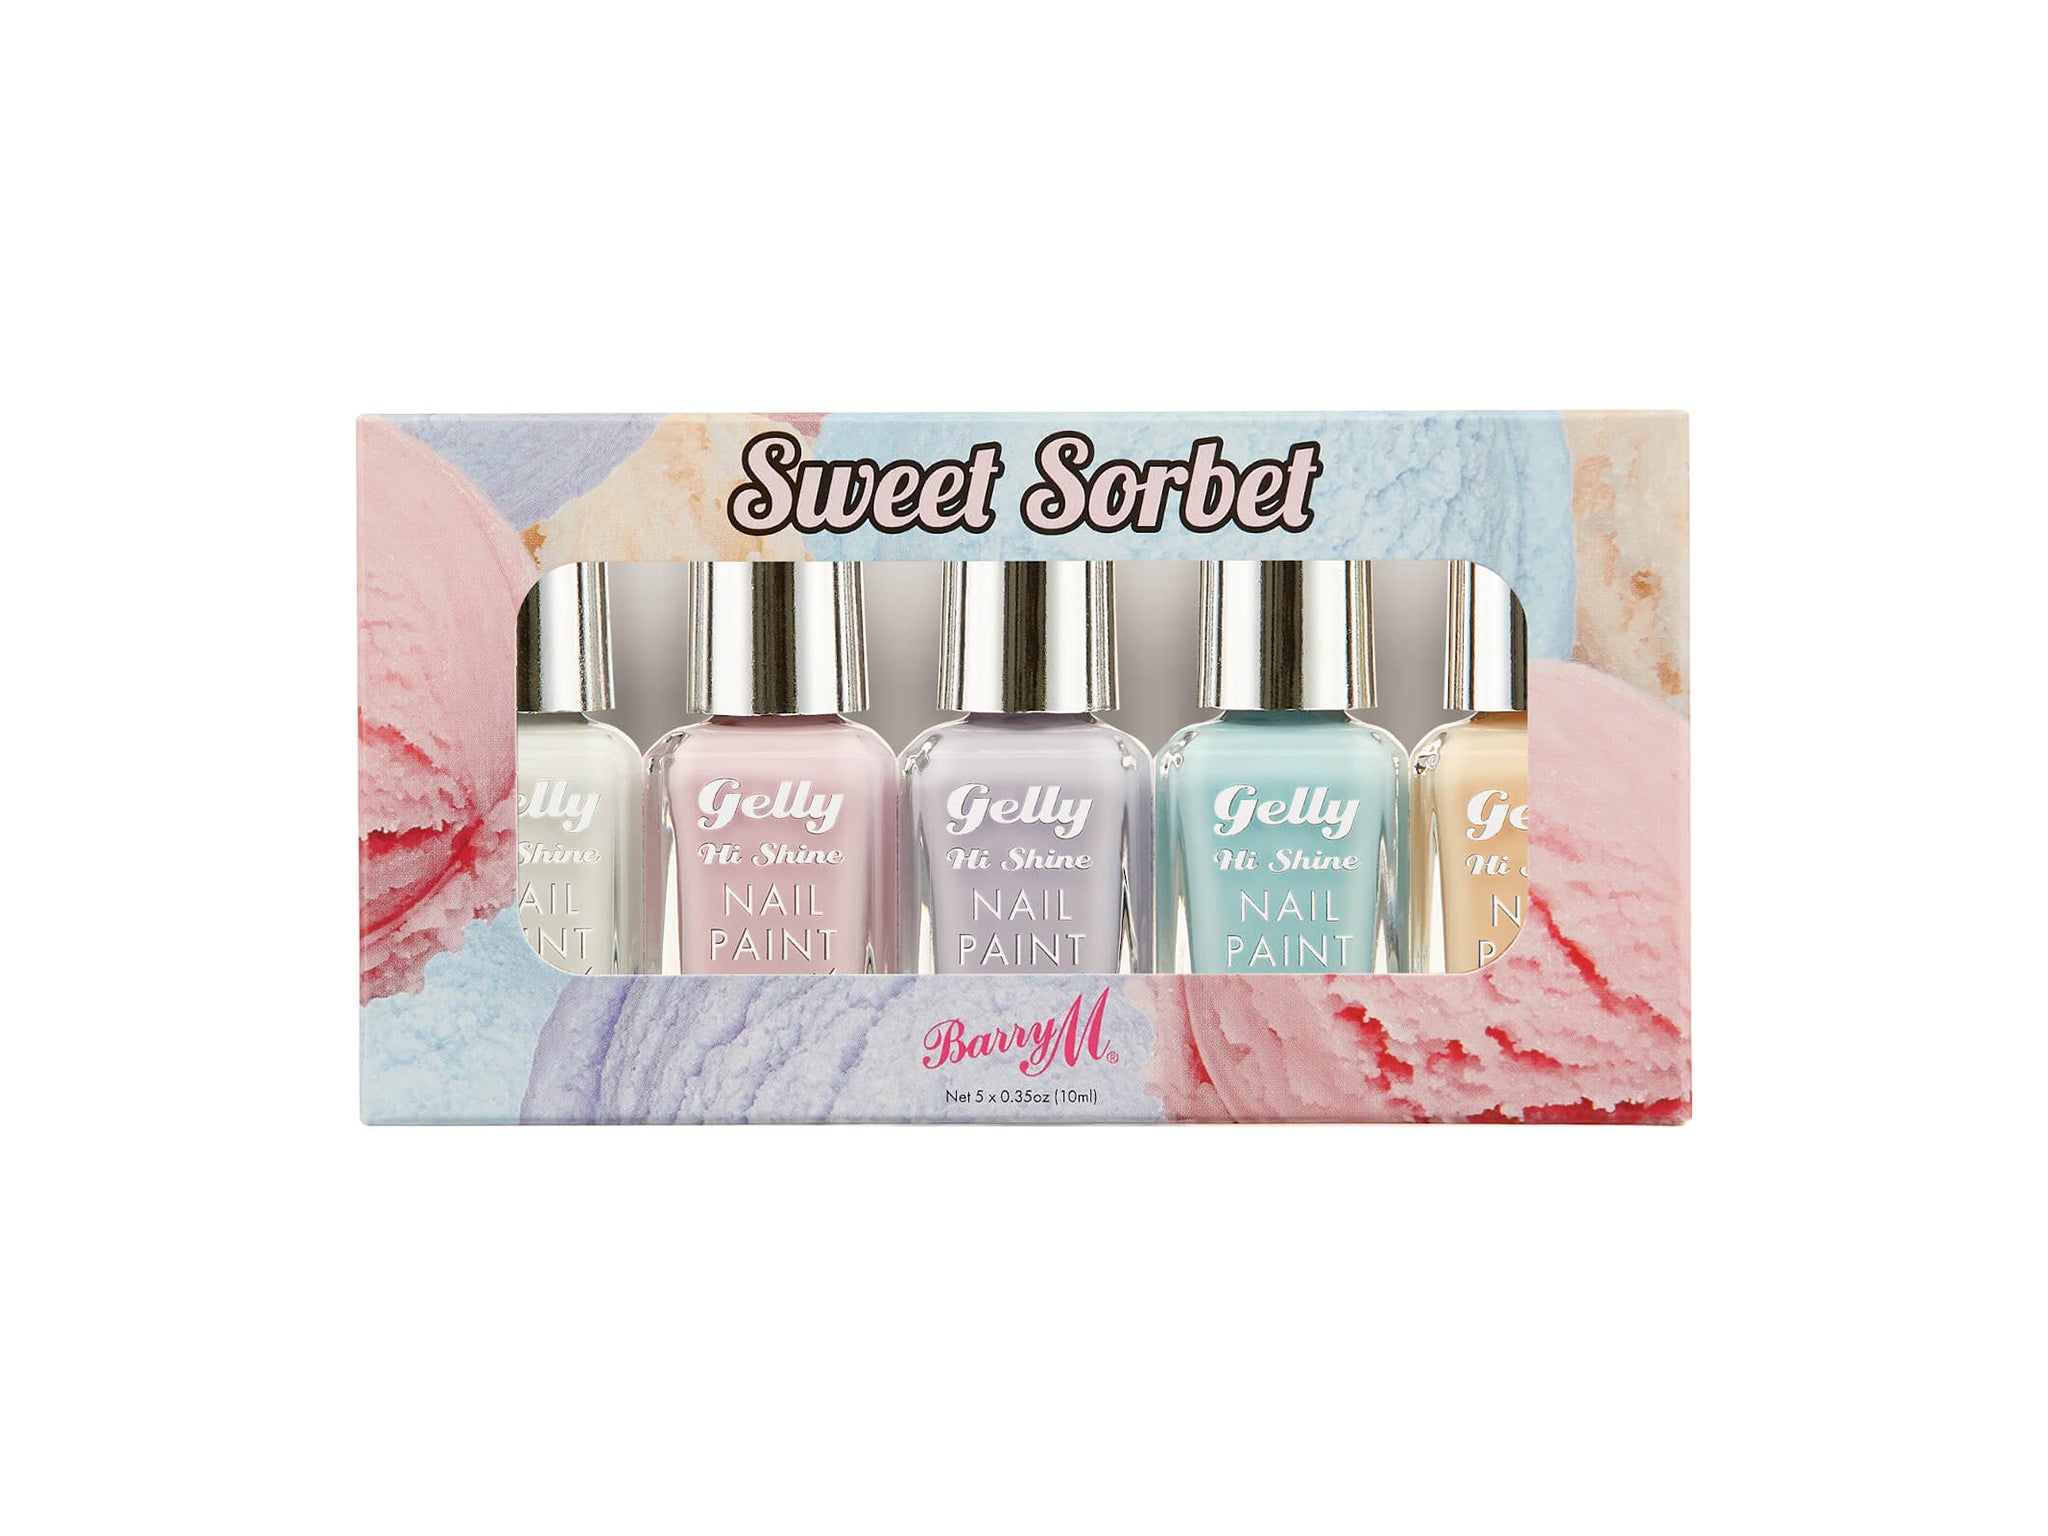 Pretty pastel shades scream summer and this Barry M set has excellent colour pay-off and a wide brush for easy application